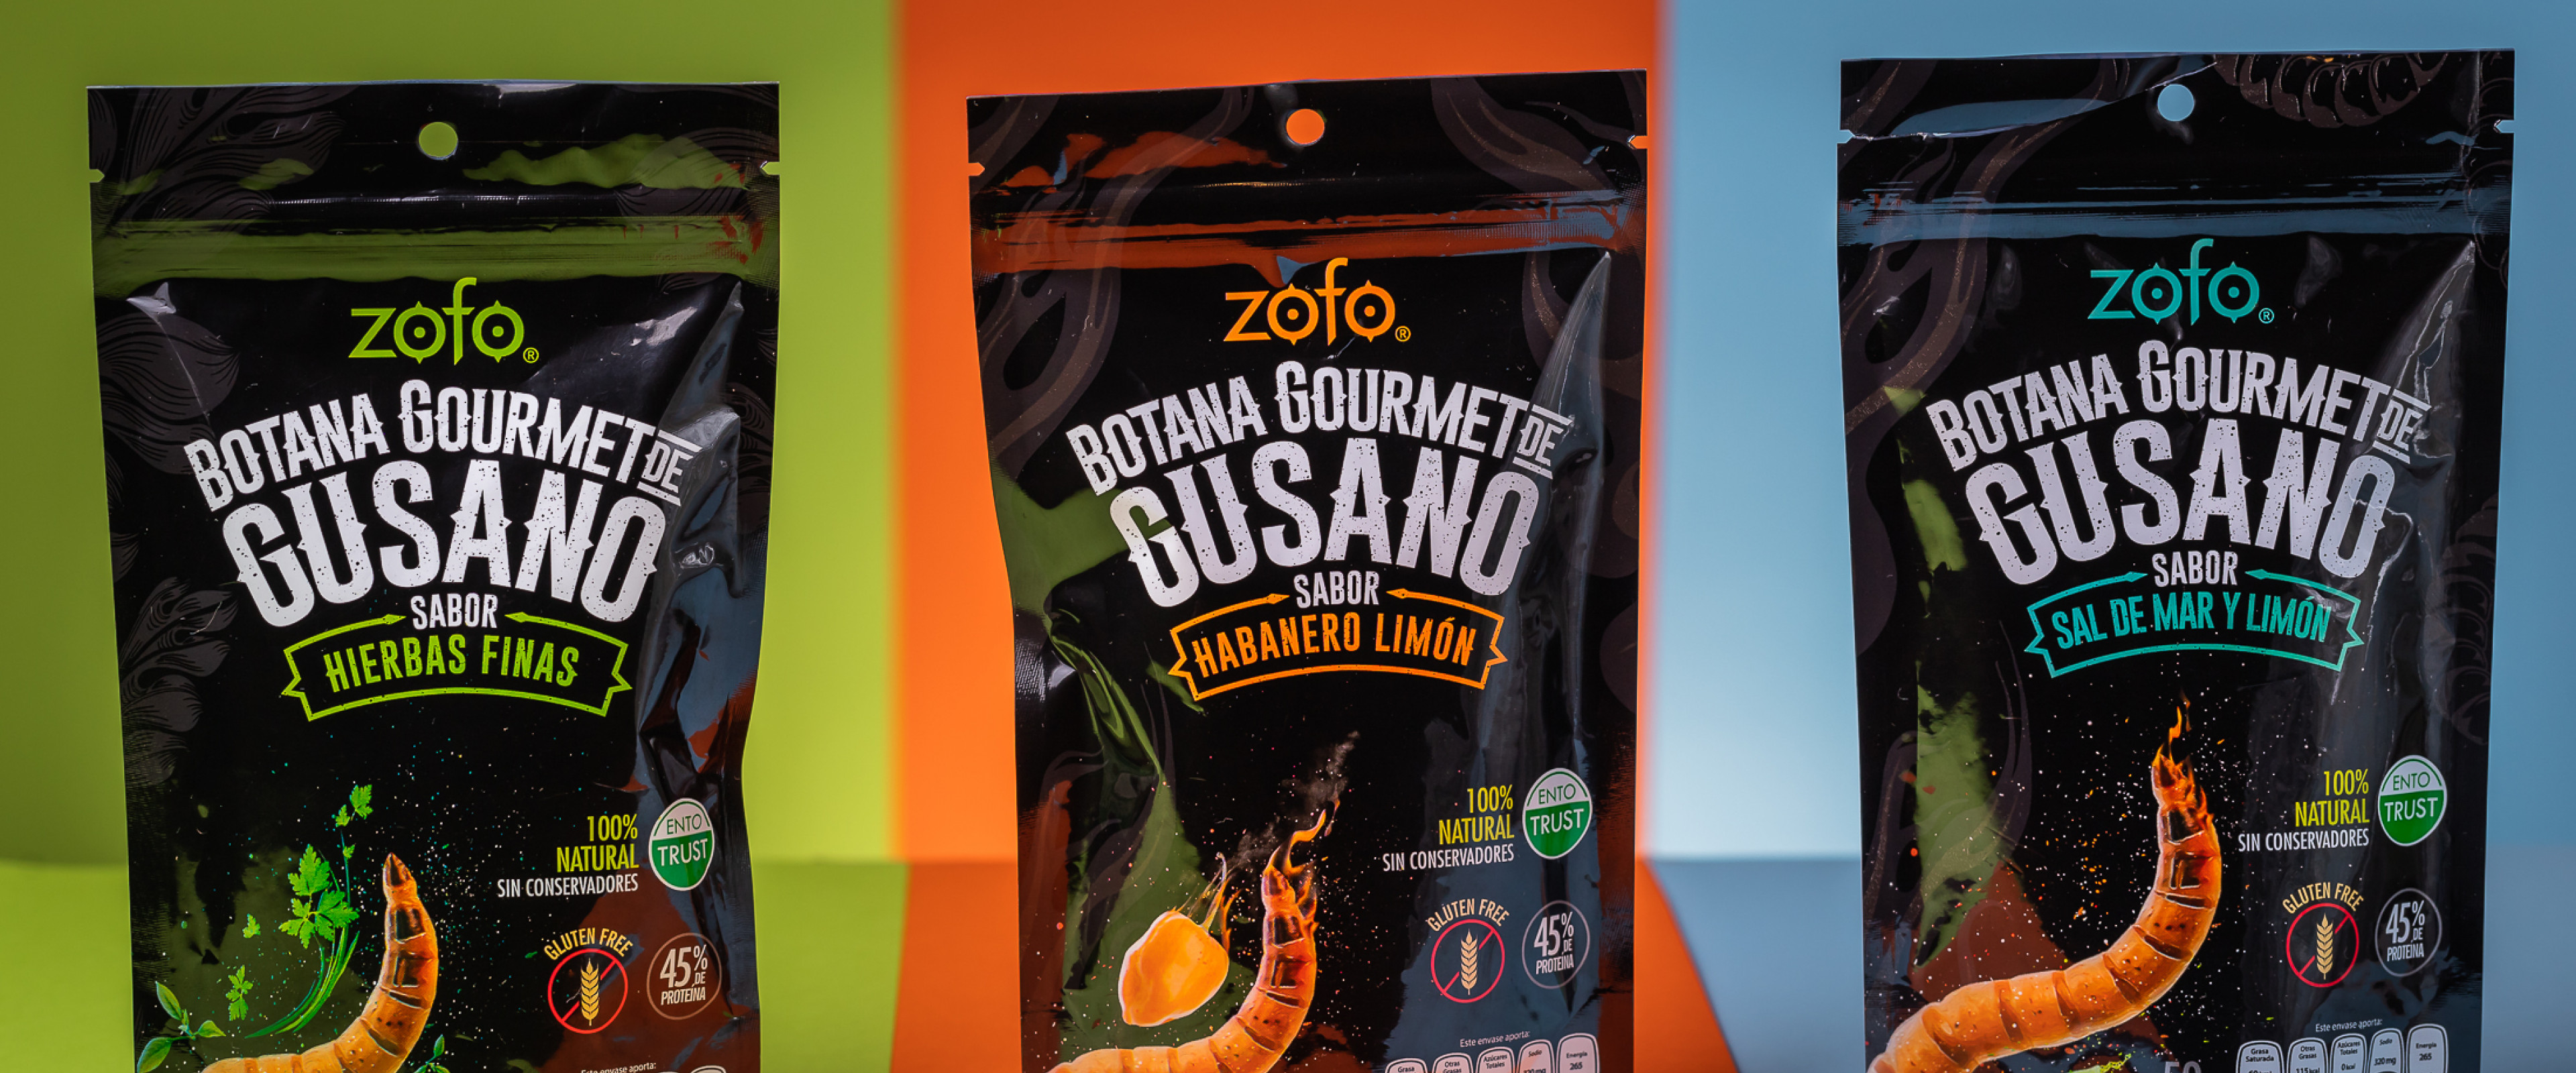 ZOFO, alternate protein snacks are displayed in three different flavors behind green, orange and blue backgrounds. 